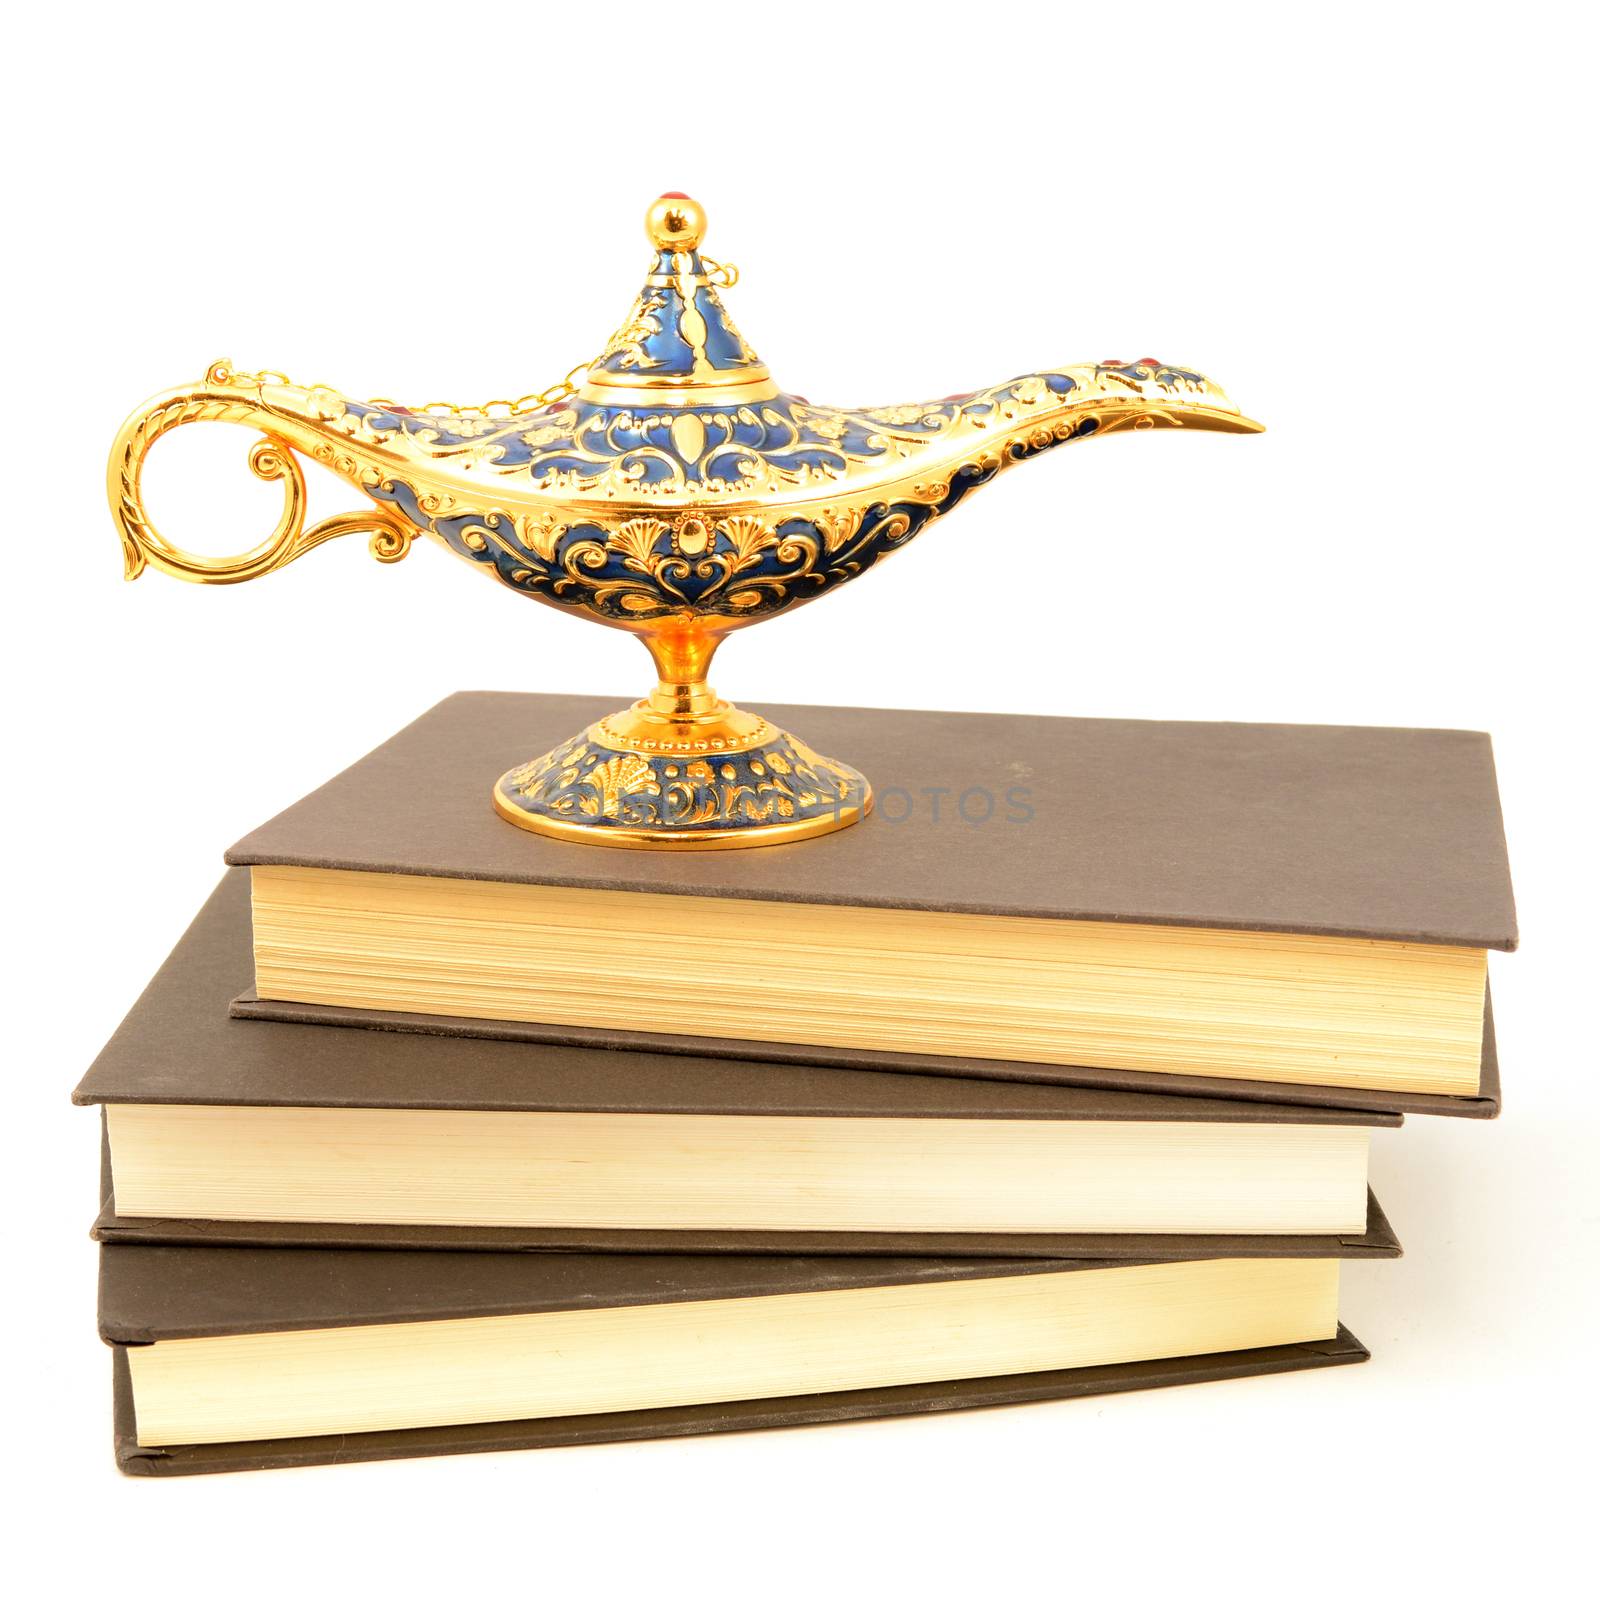 A few story books with a genie lamp to give meaning to the legends written inside the pages.